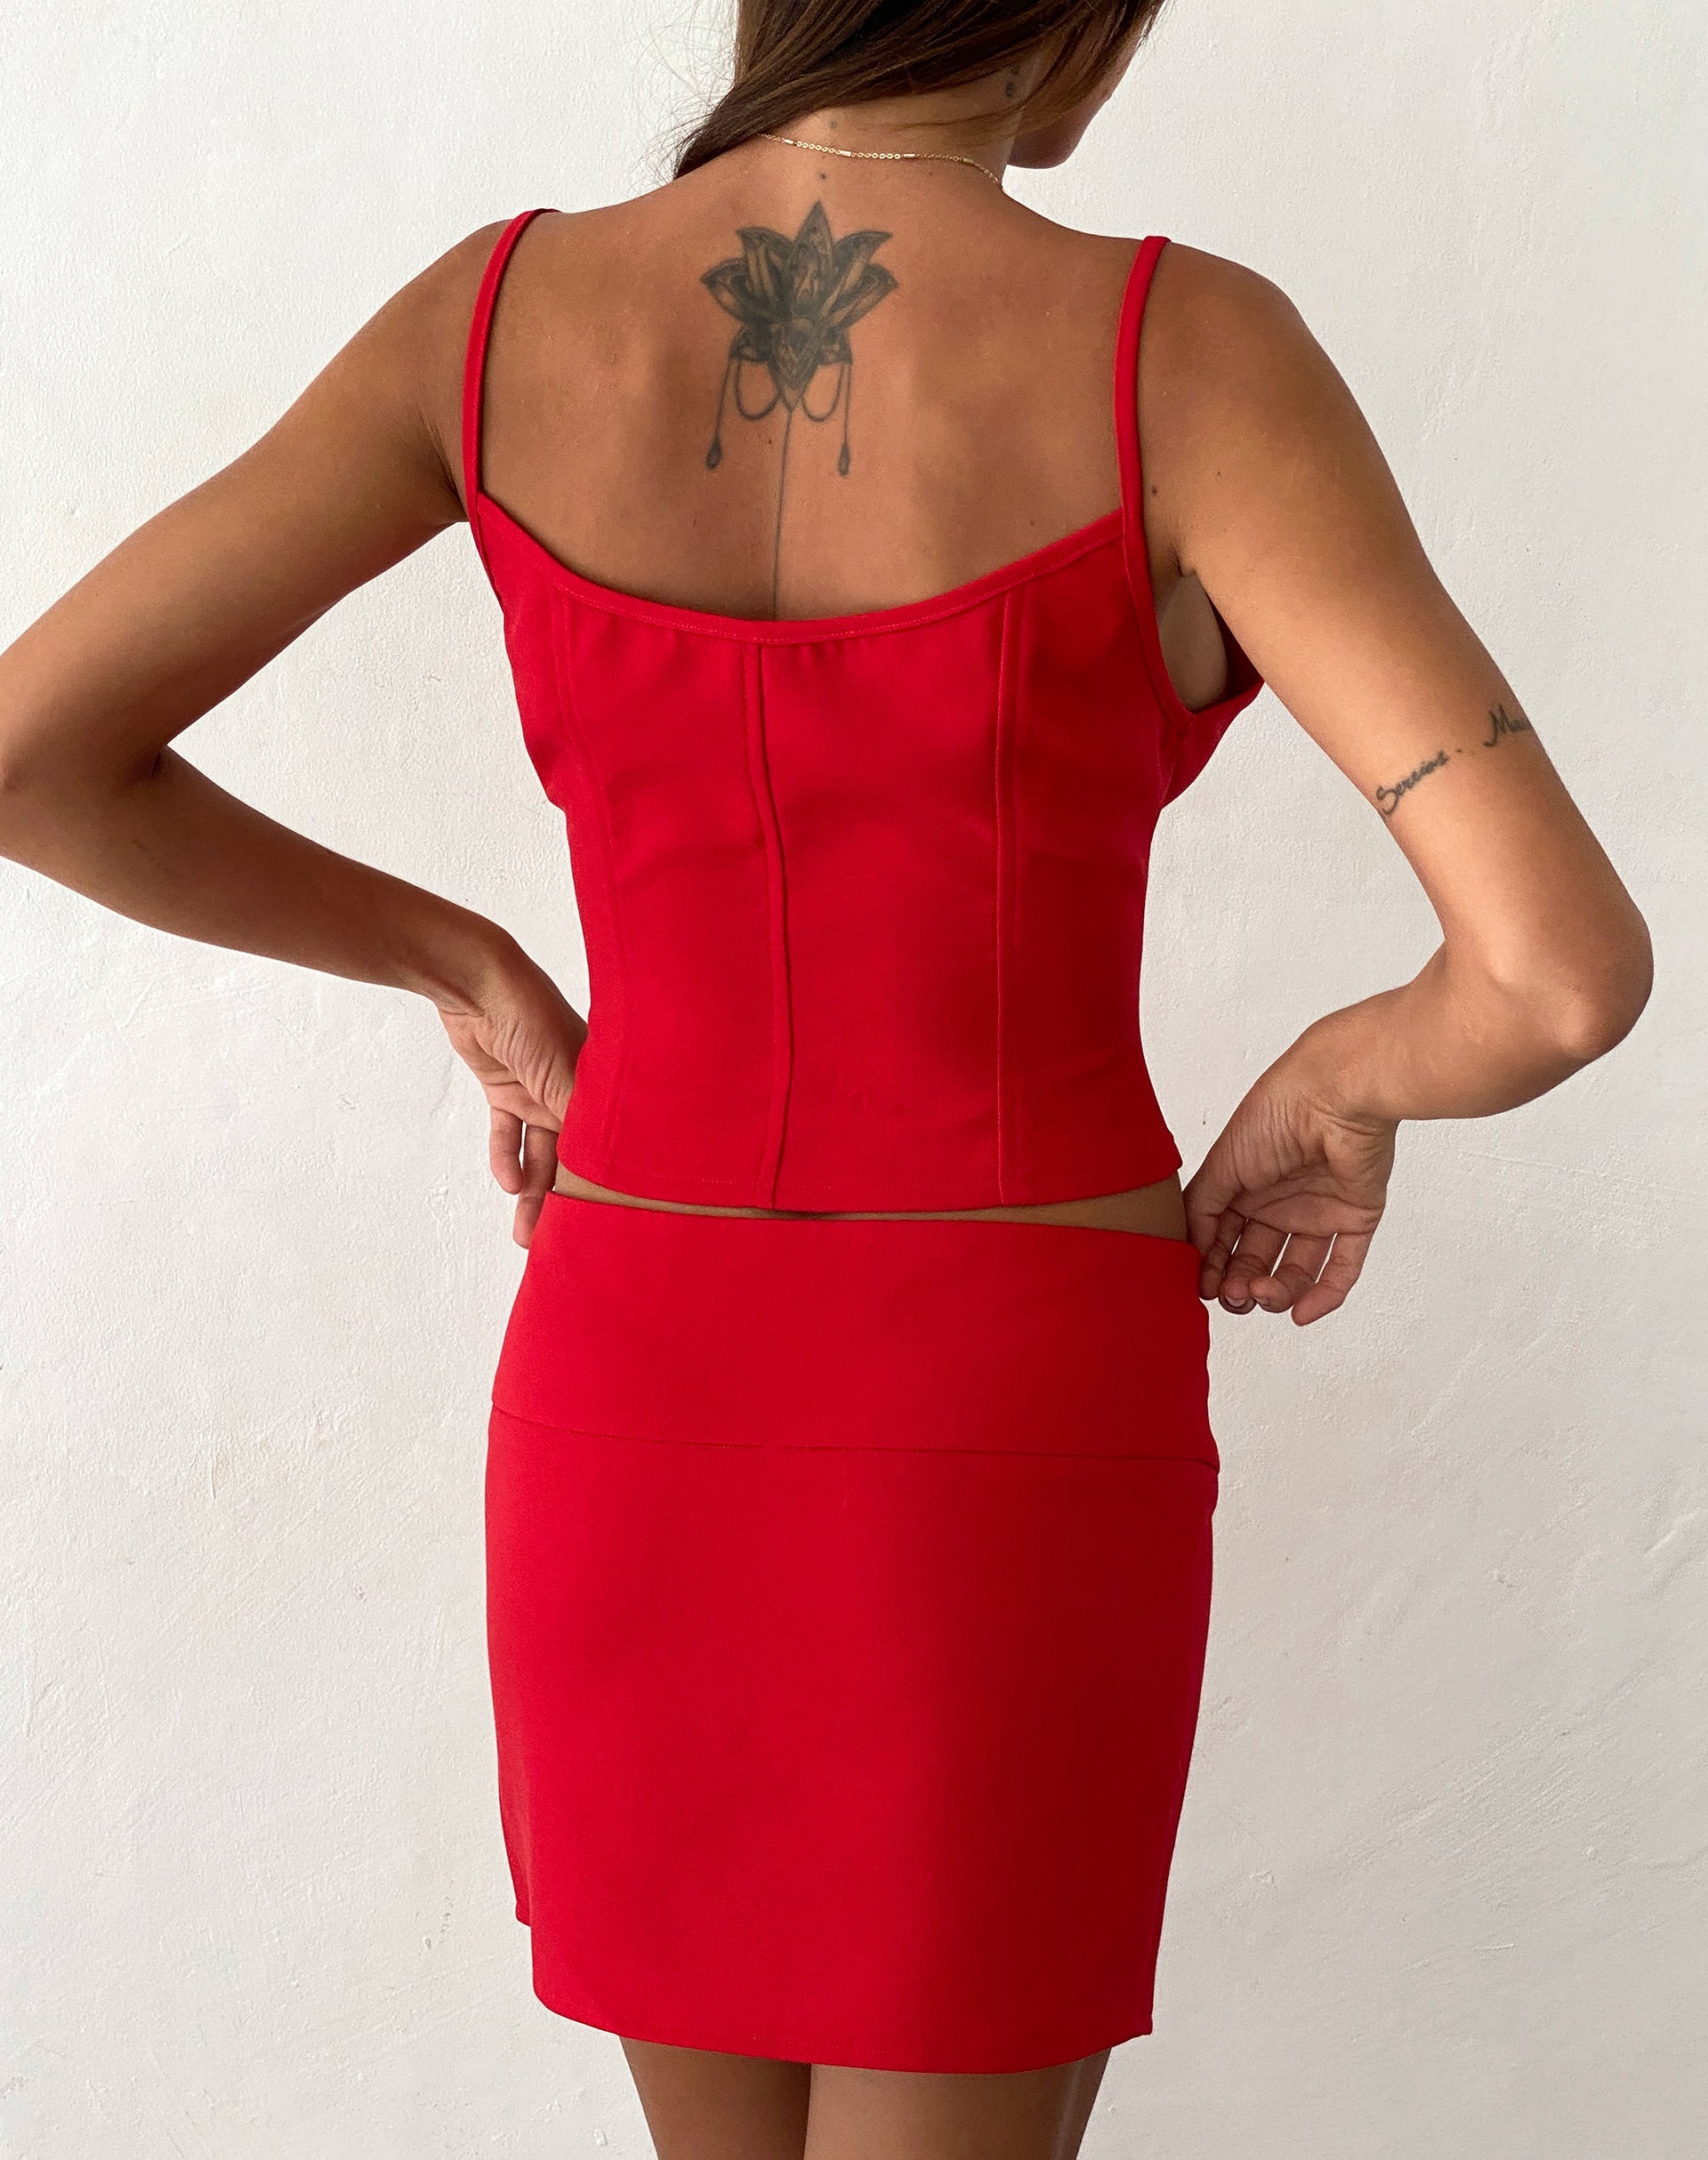 Image of Yanti Mini Skirt in Red with Red Bows